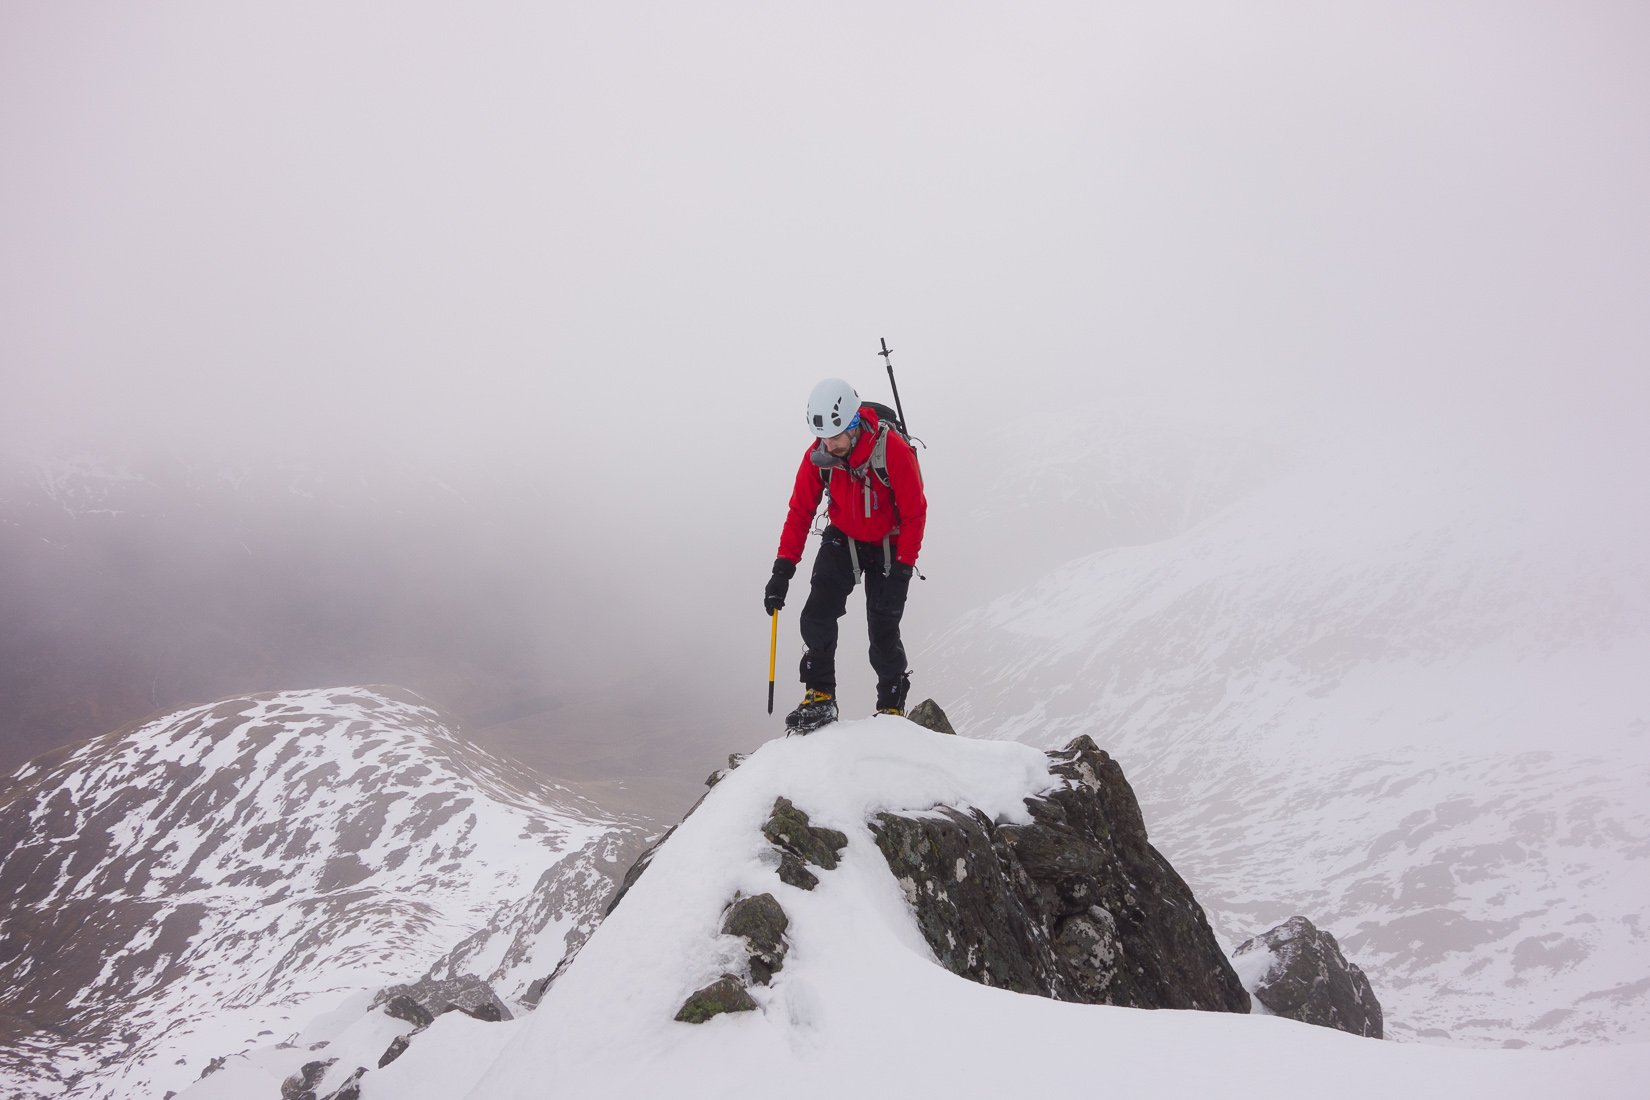 Entering the mist on the Forcan Ridge